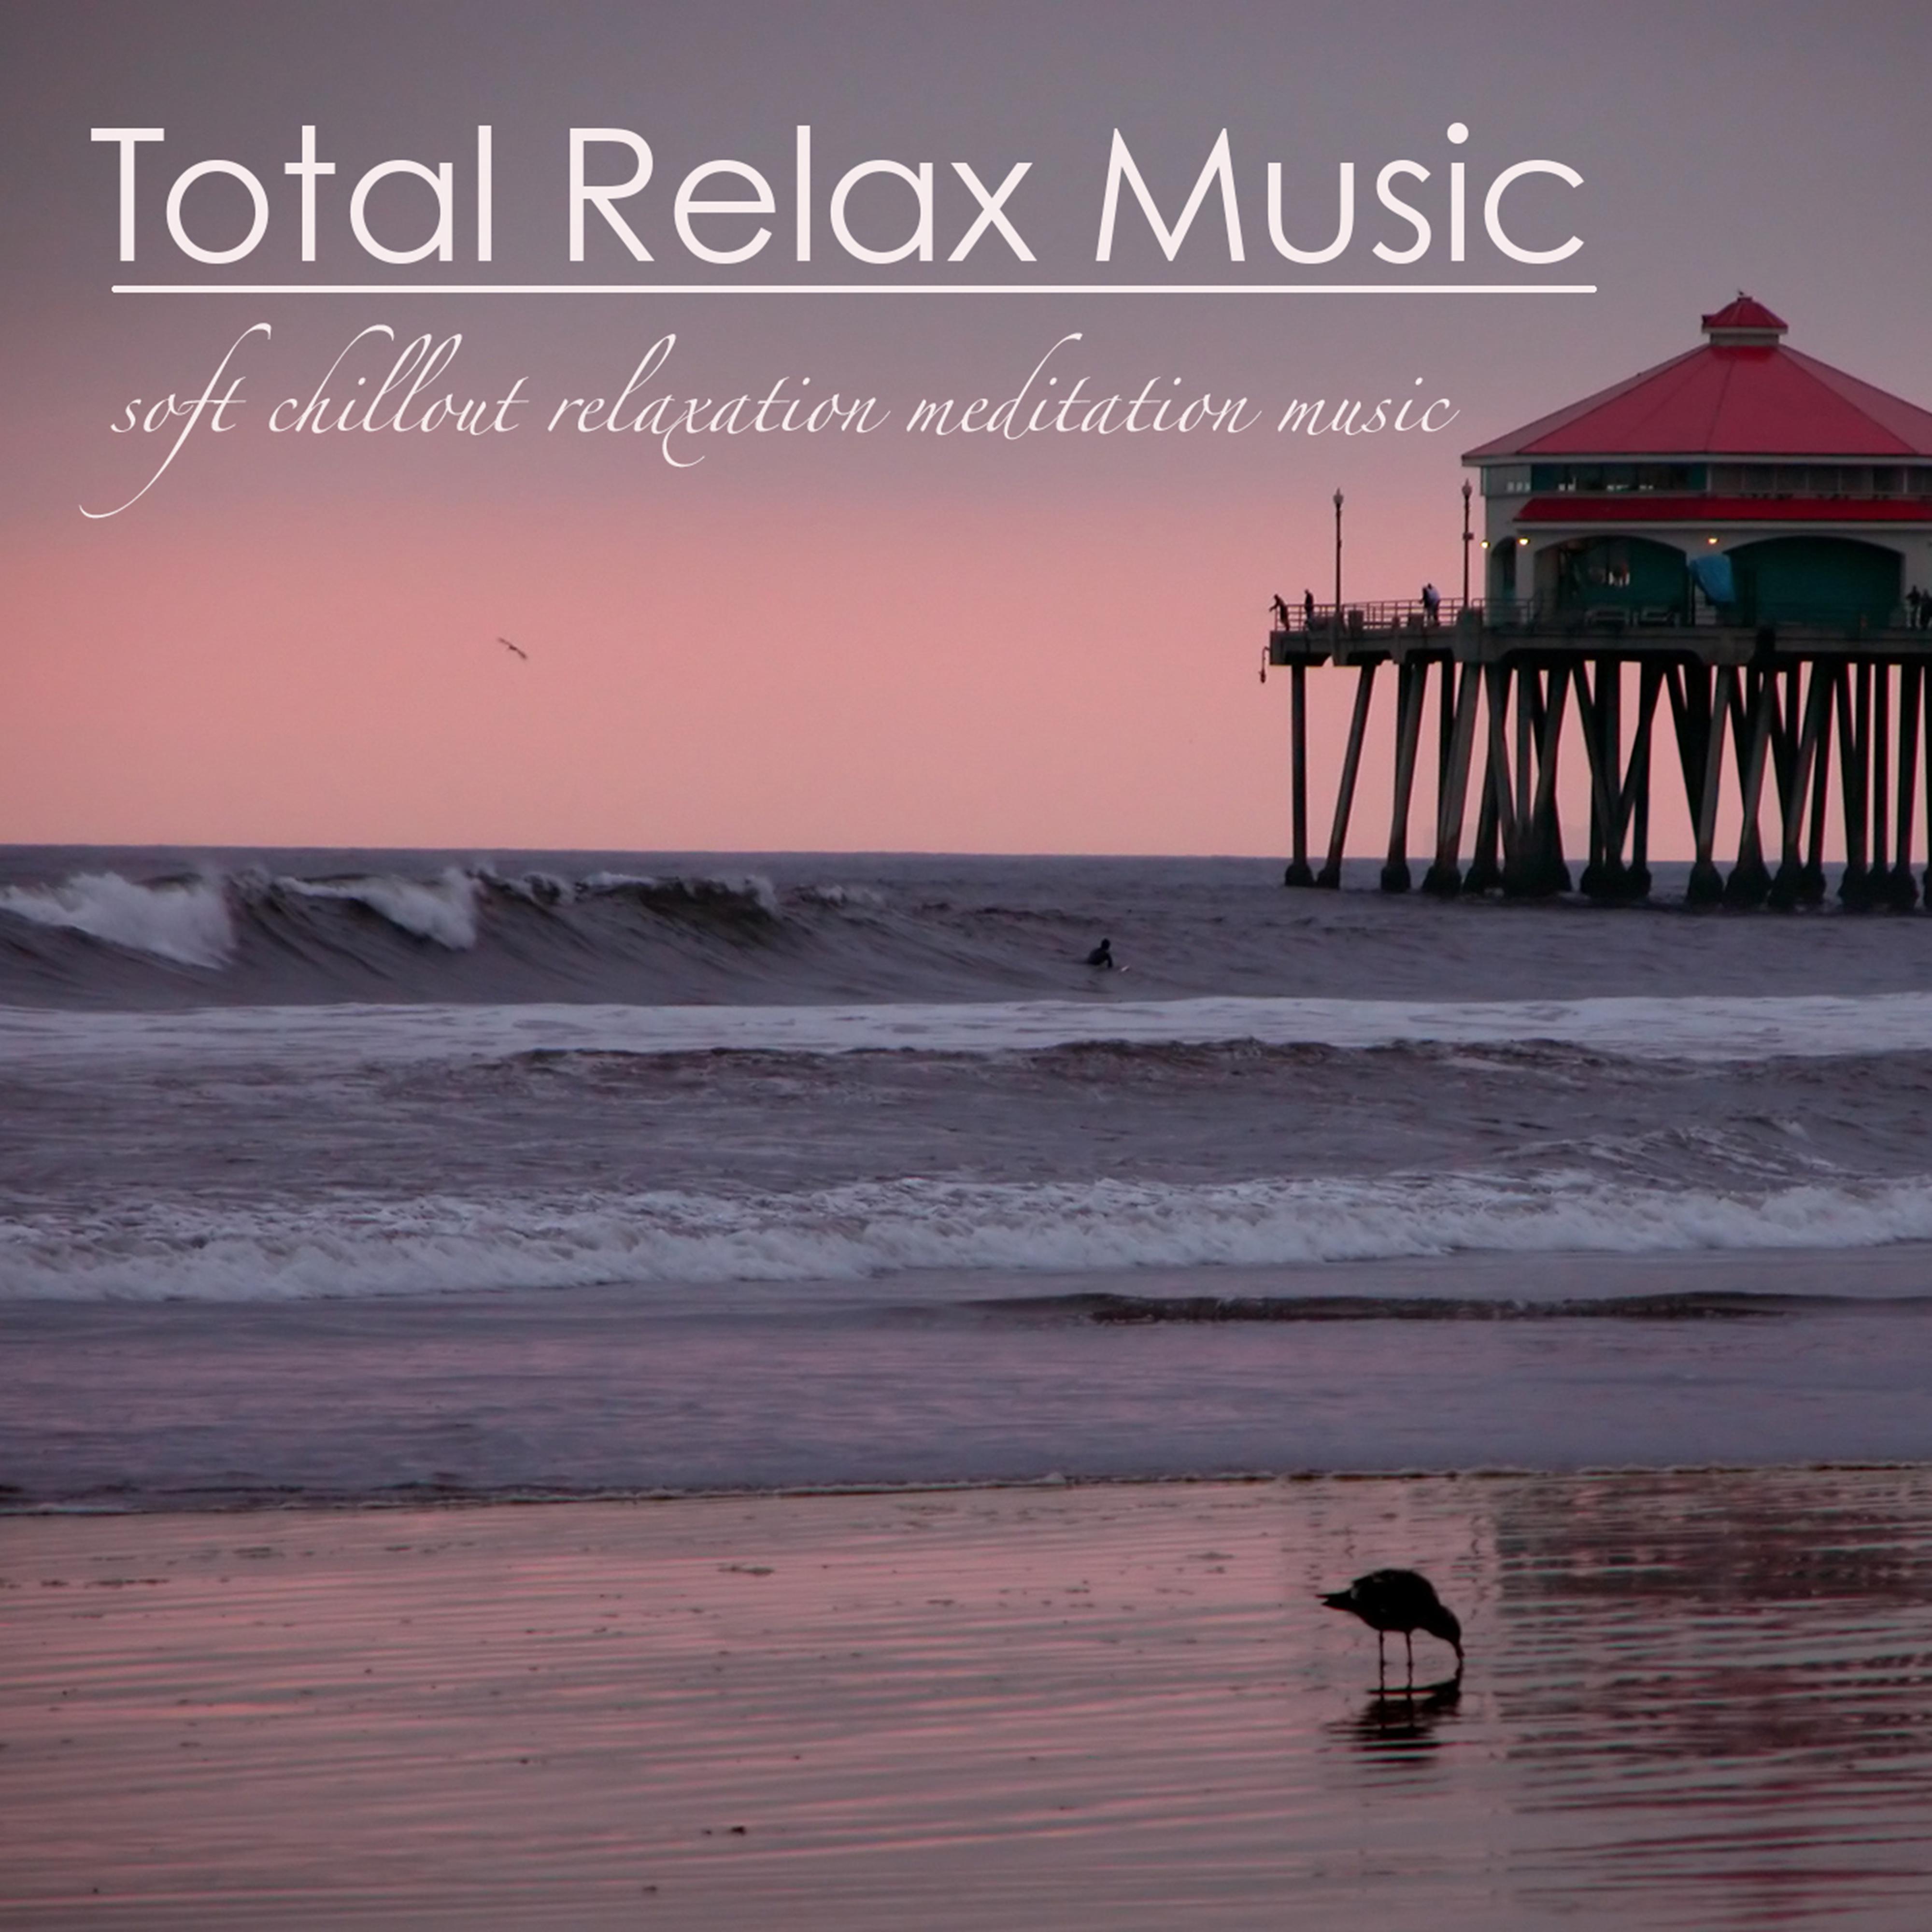 Total Relax Music - Soft Chillout Relaxation Meditation Music for Deep Relaxation, Anxiety Relief & Mindfulness Meditation